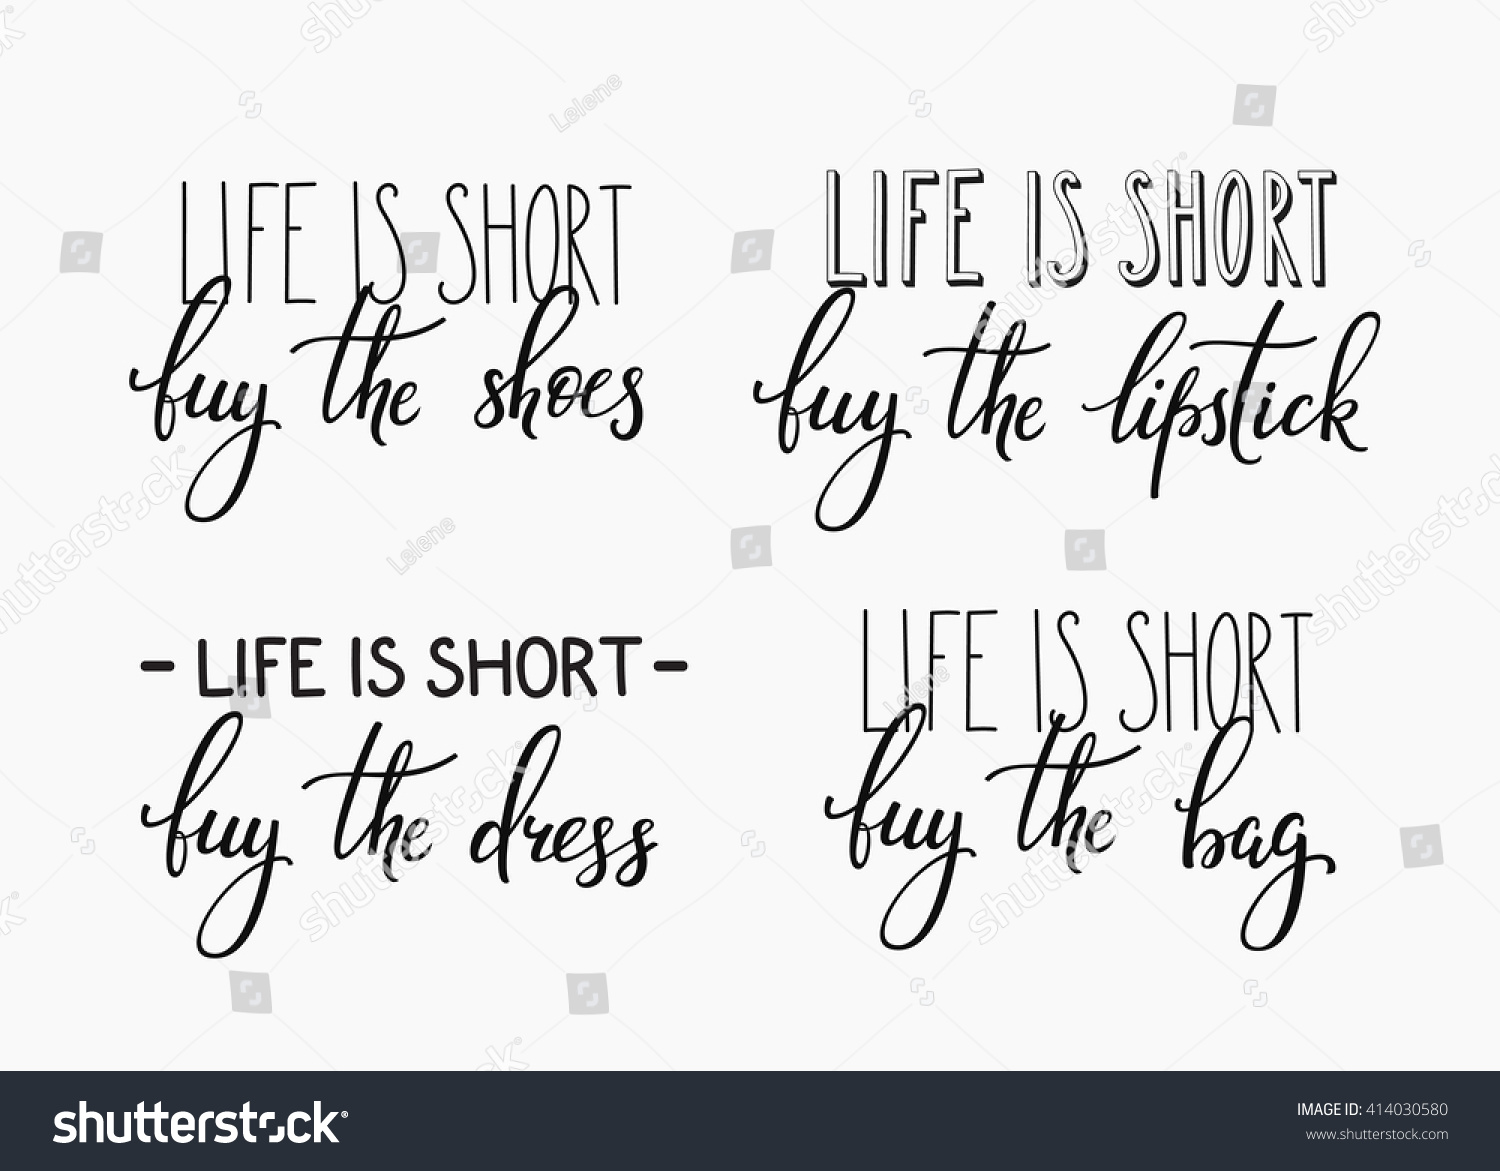 Life is short Buy the shoes dress bag lipstick quote lettering Calligraphy inspiration graphic design